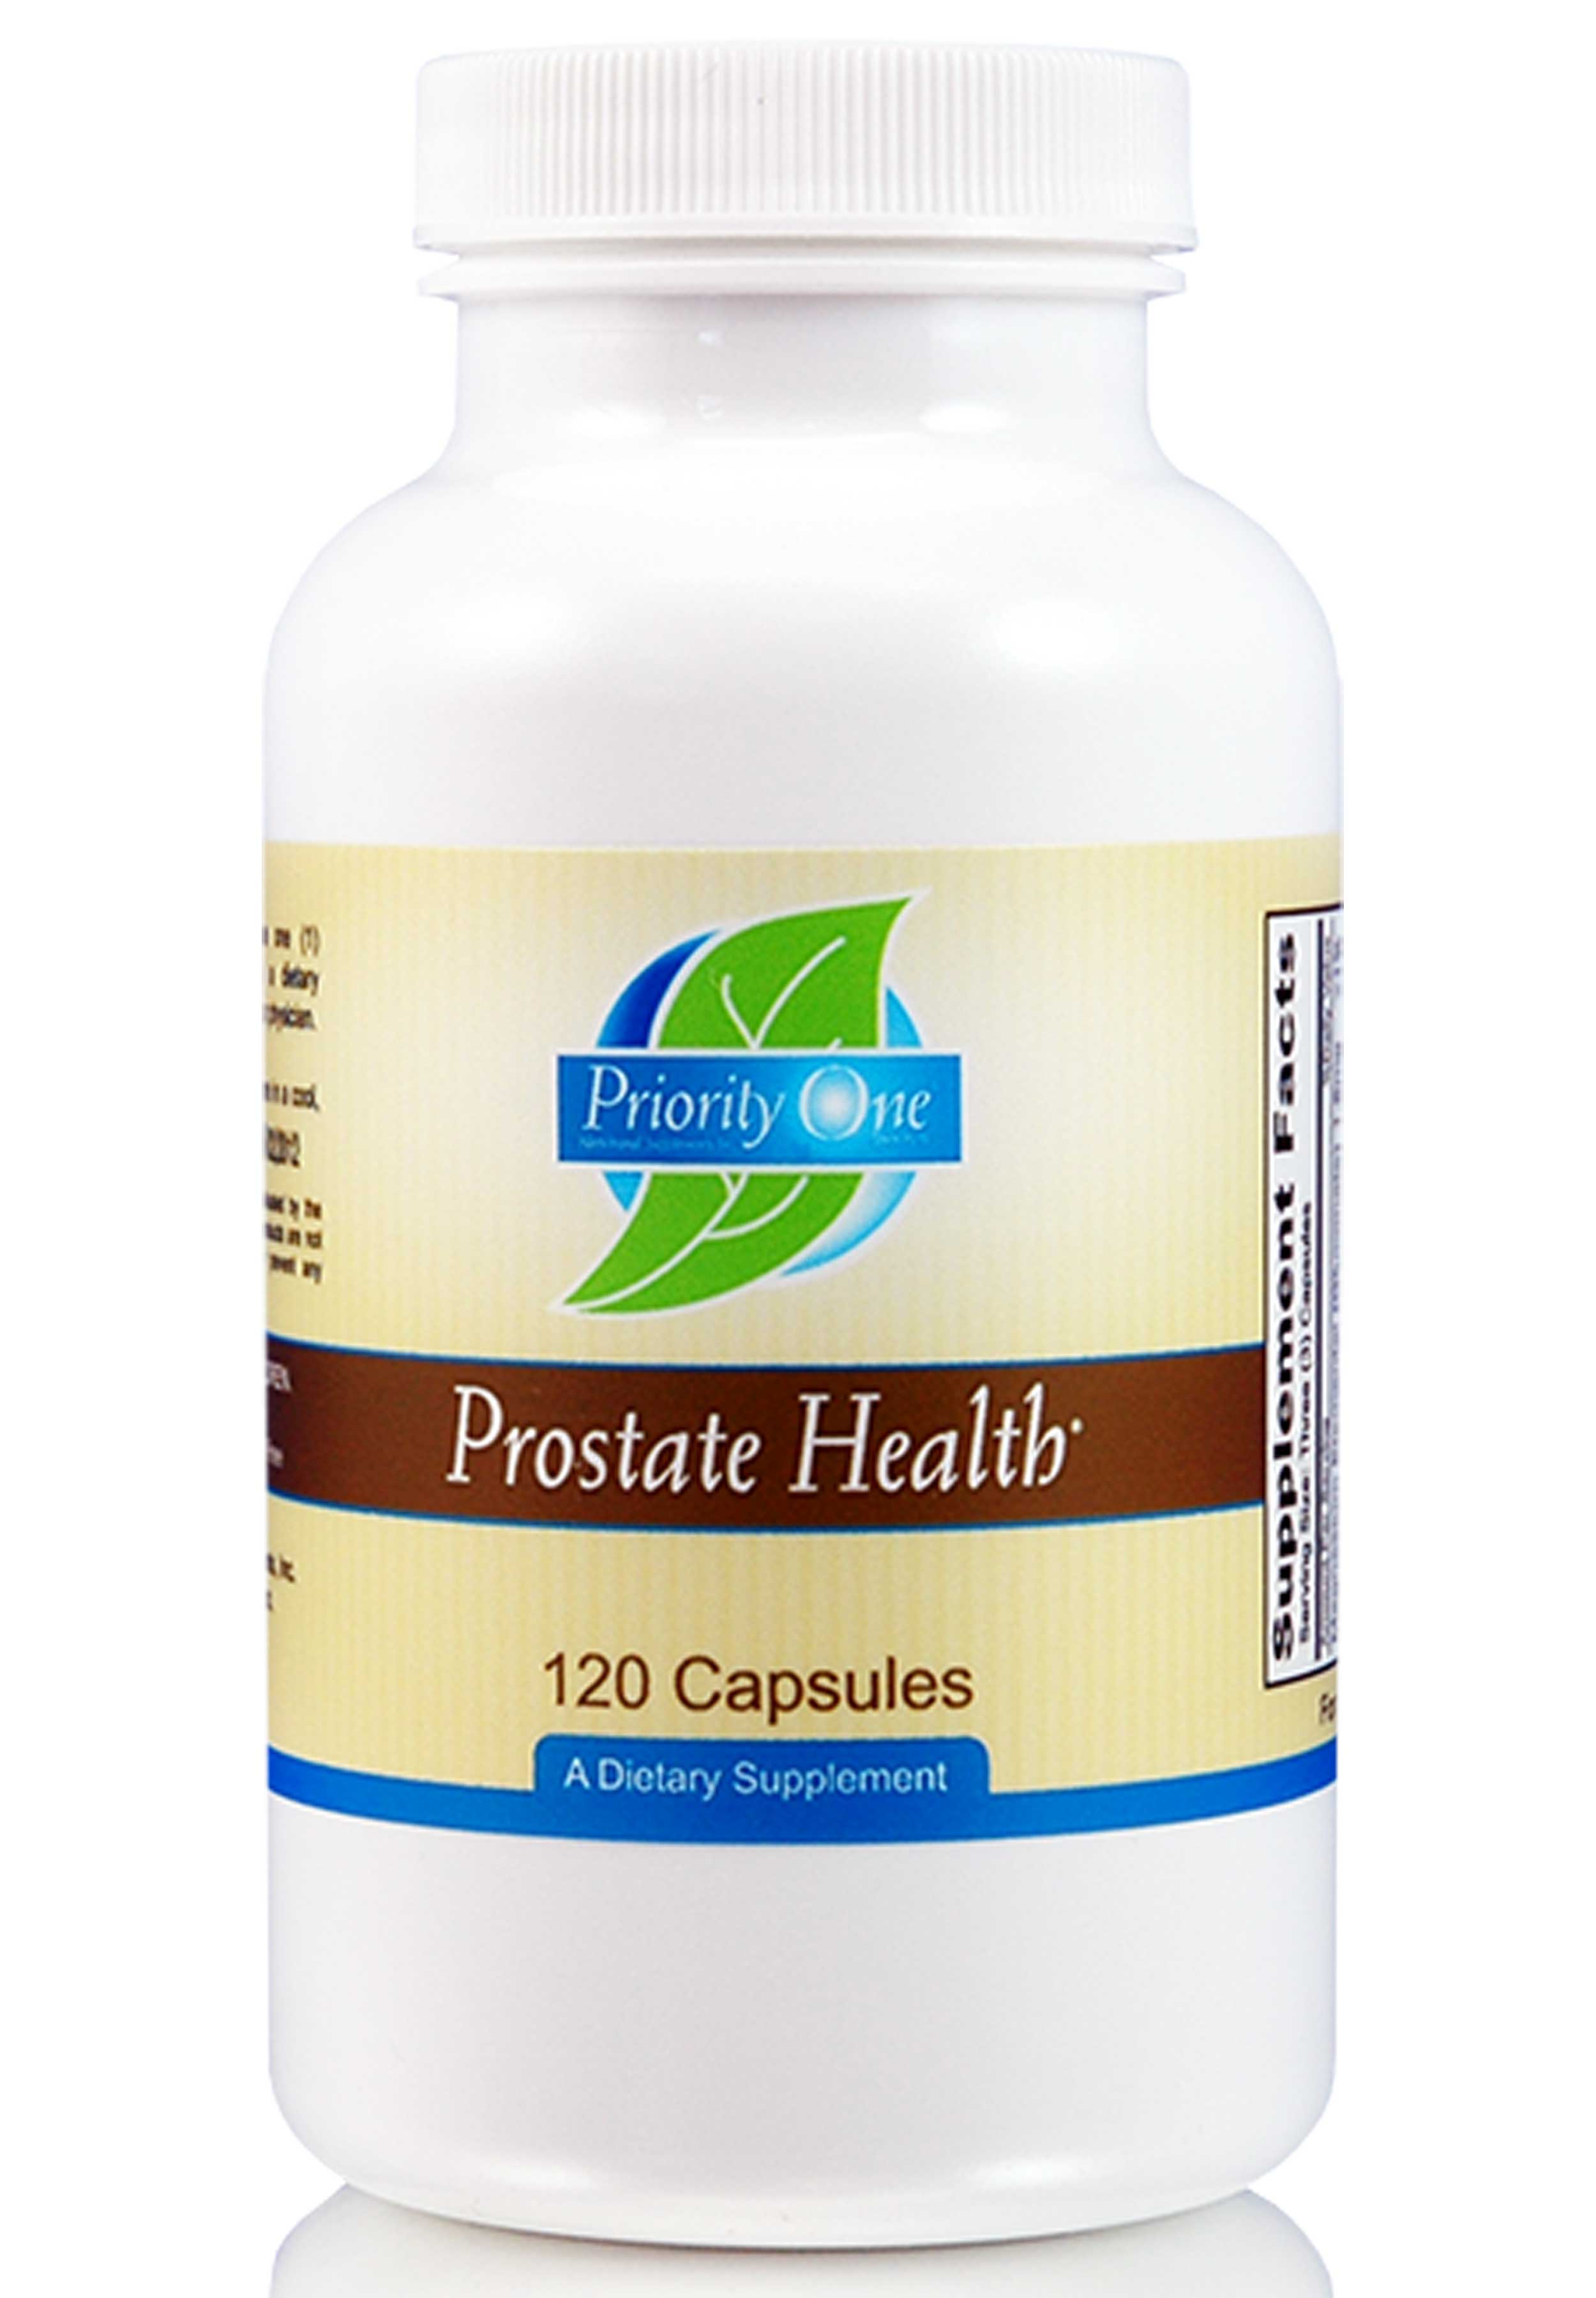 Priority One Prostate Health